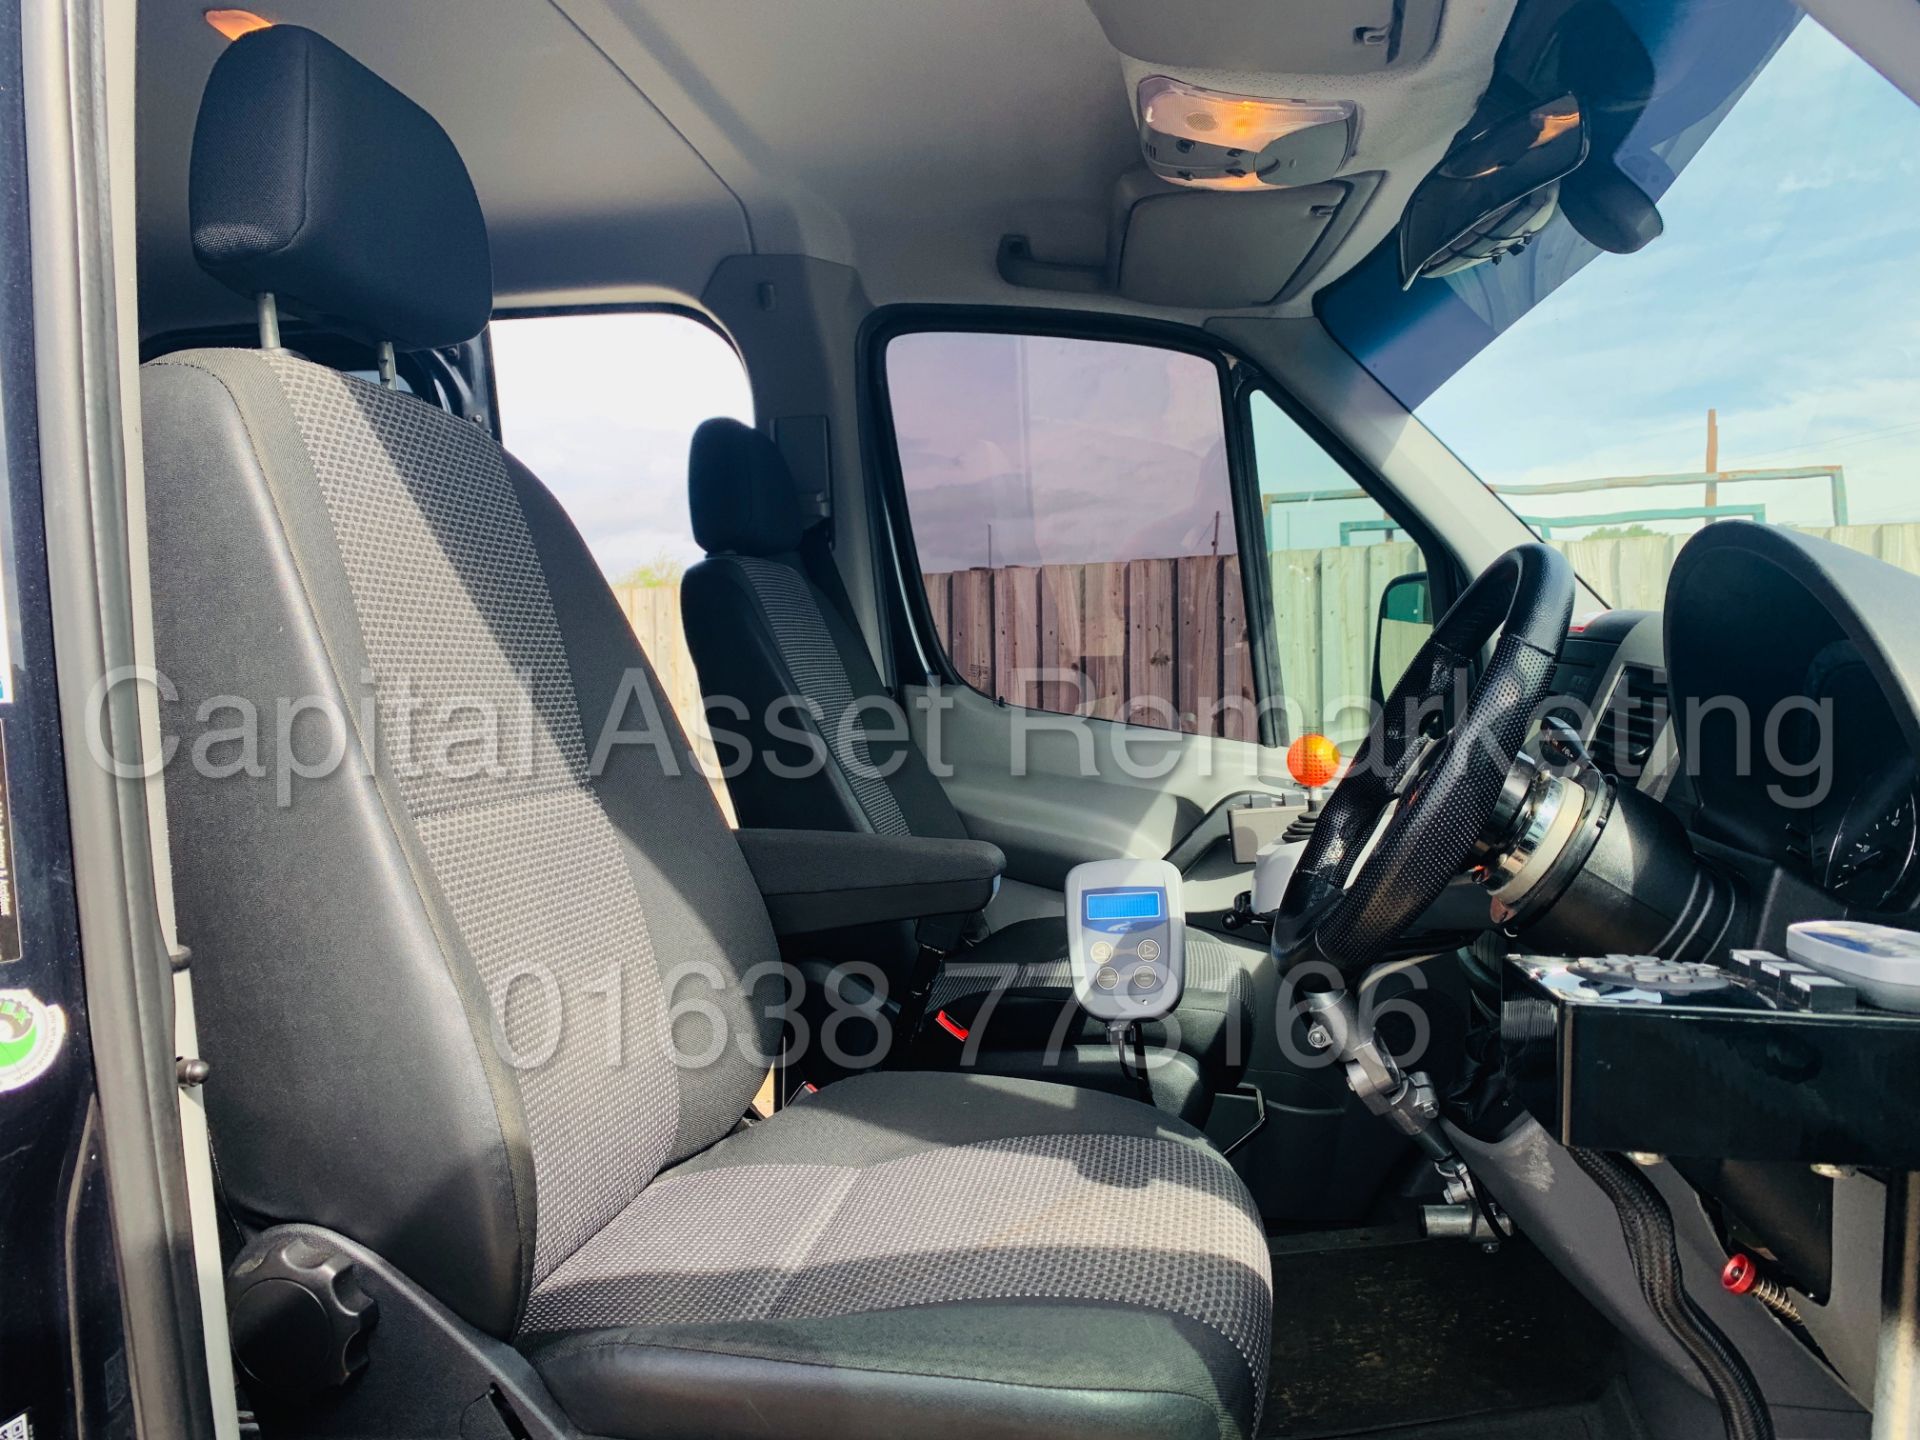 (ON SALE) MERCEDES-BENZ SPRINTER 210 CDI *WHEEL CHAIR ACCESSIBLE - DISABILITY VEHICLE* (2013 MODEL) - Image 33 of 45